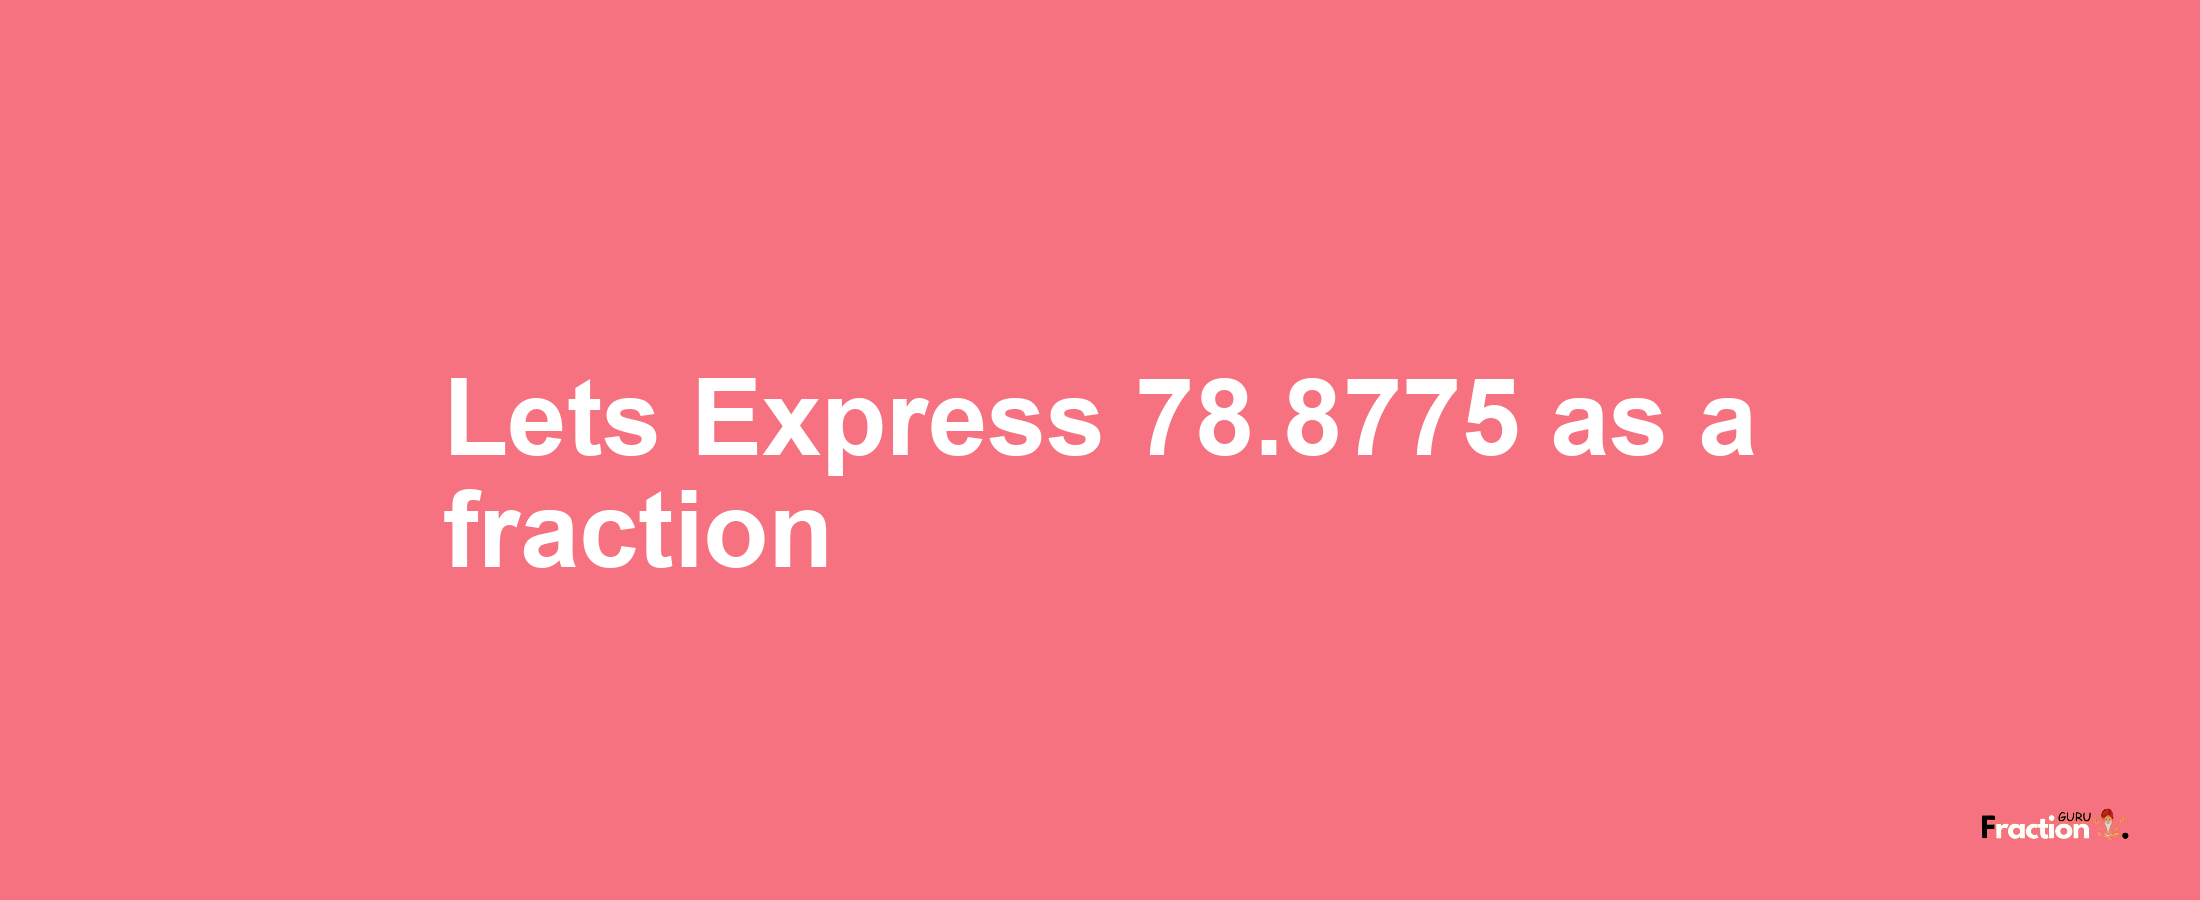 Lets Express 78.8775 as afraction